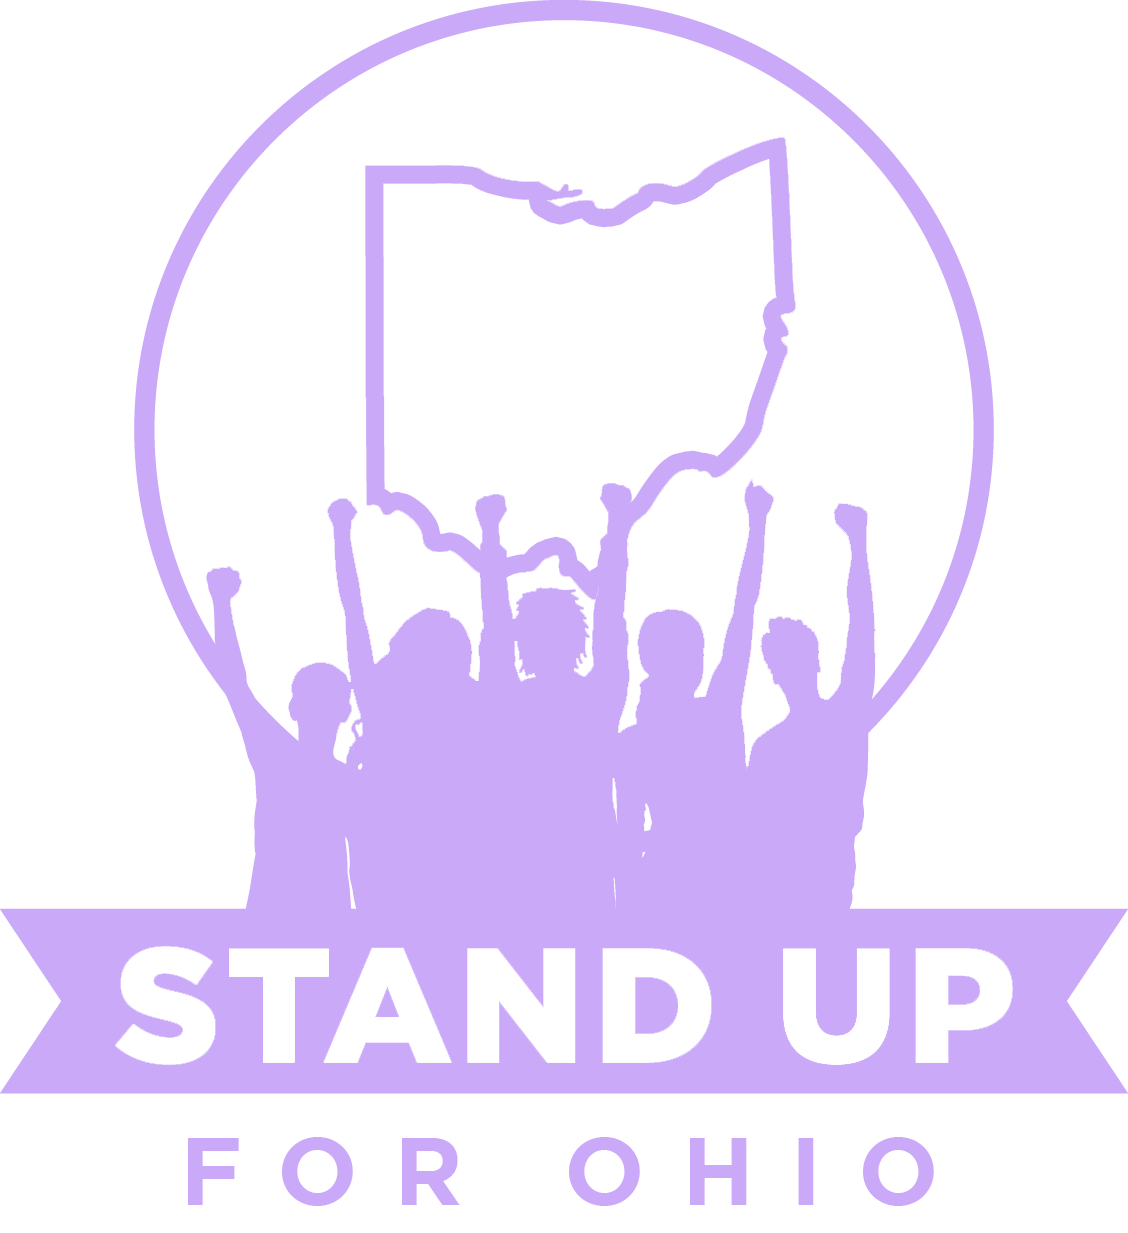 Stand Up for Ohio